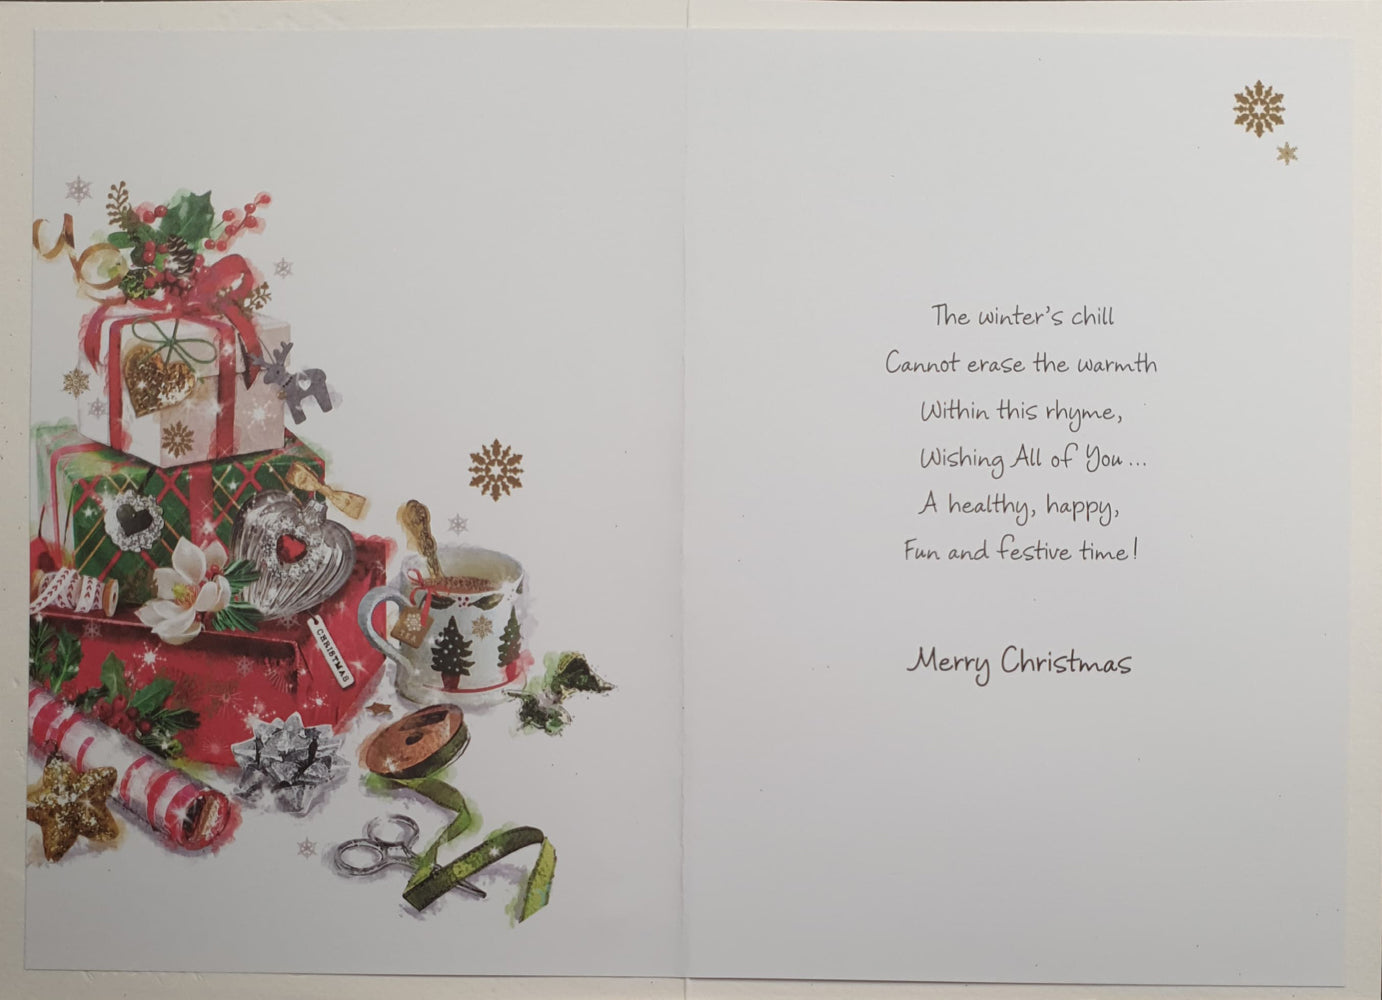 To All Of You Christmas Card - Stars & Lots Of Gifts